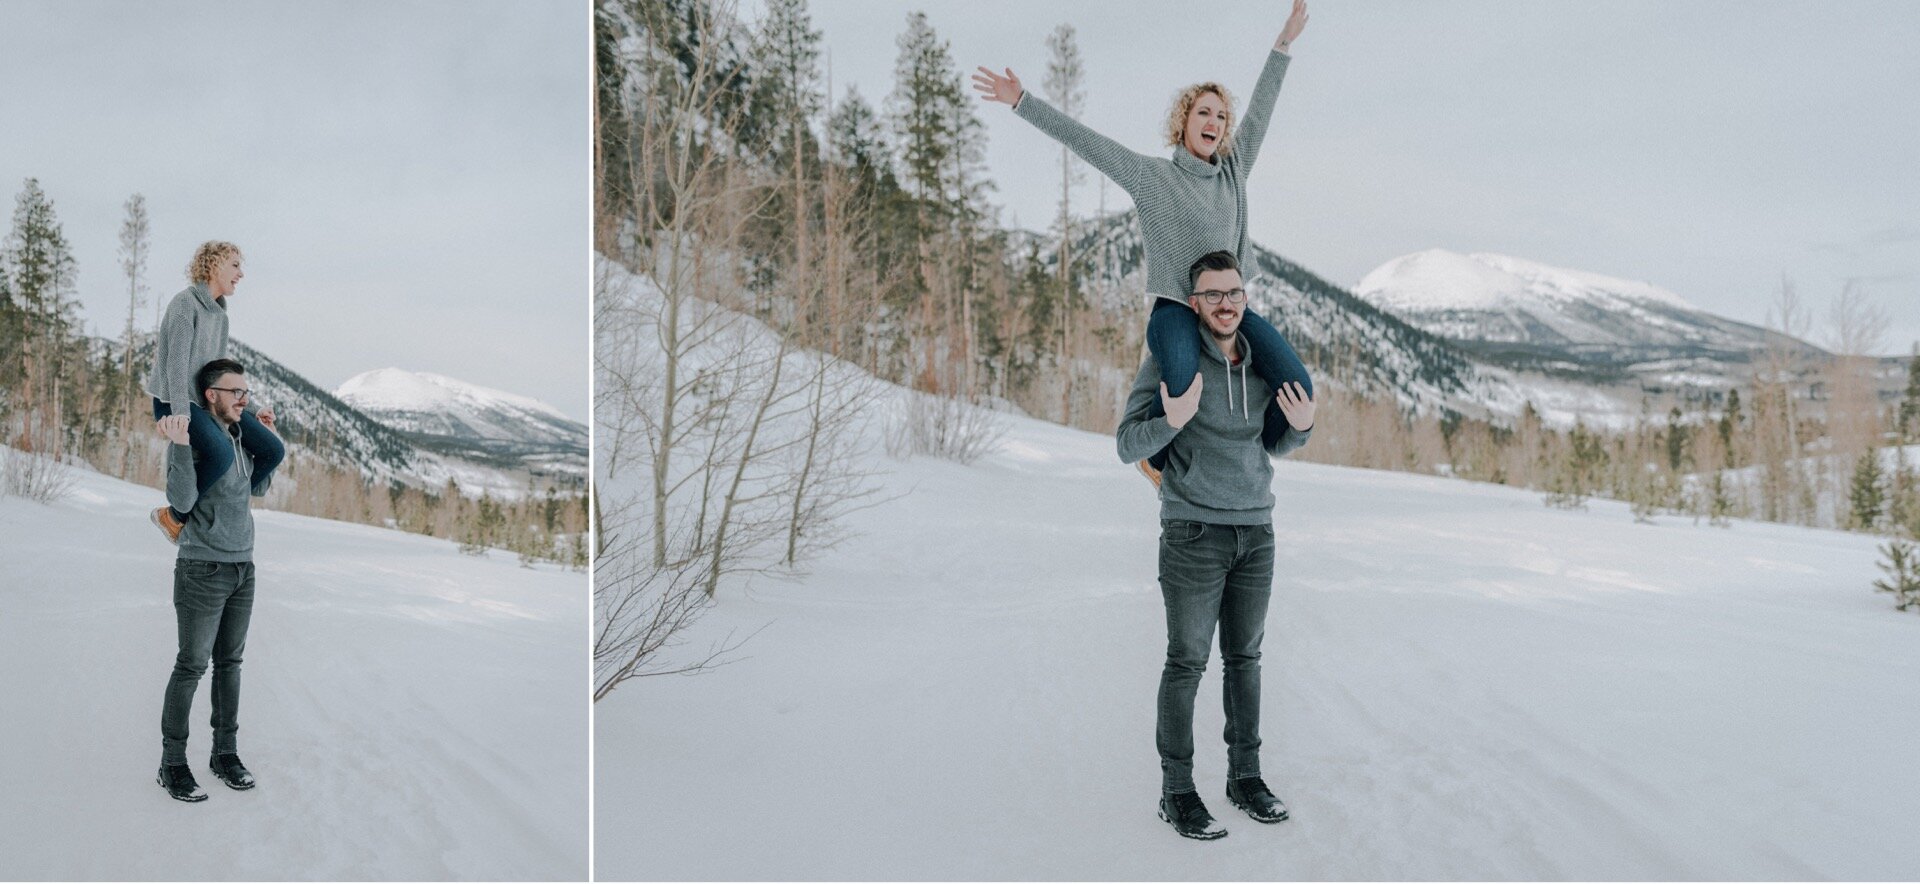 15_Kelsey&Taylor076_Kelsey&Taylor078_frisco_Photographer_engagement_Co_Hannah_Session_Photography_Minnesota_Snowy_Colorado_adventure_ampe_Mountain_engaged.jpg